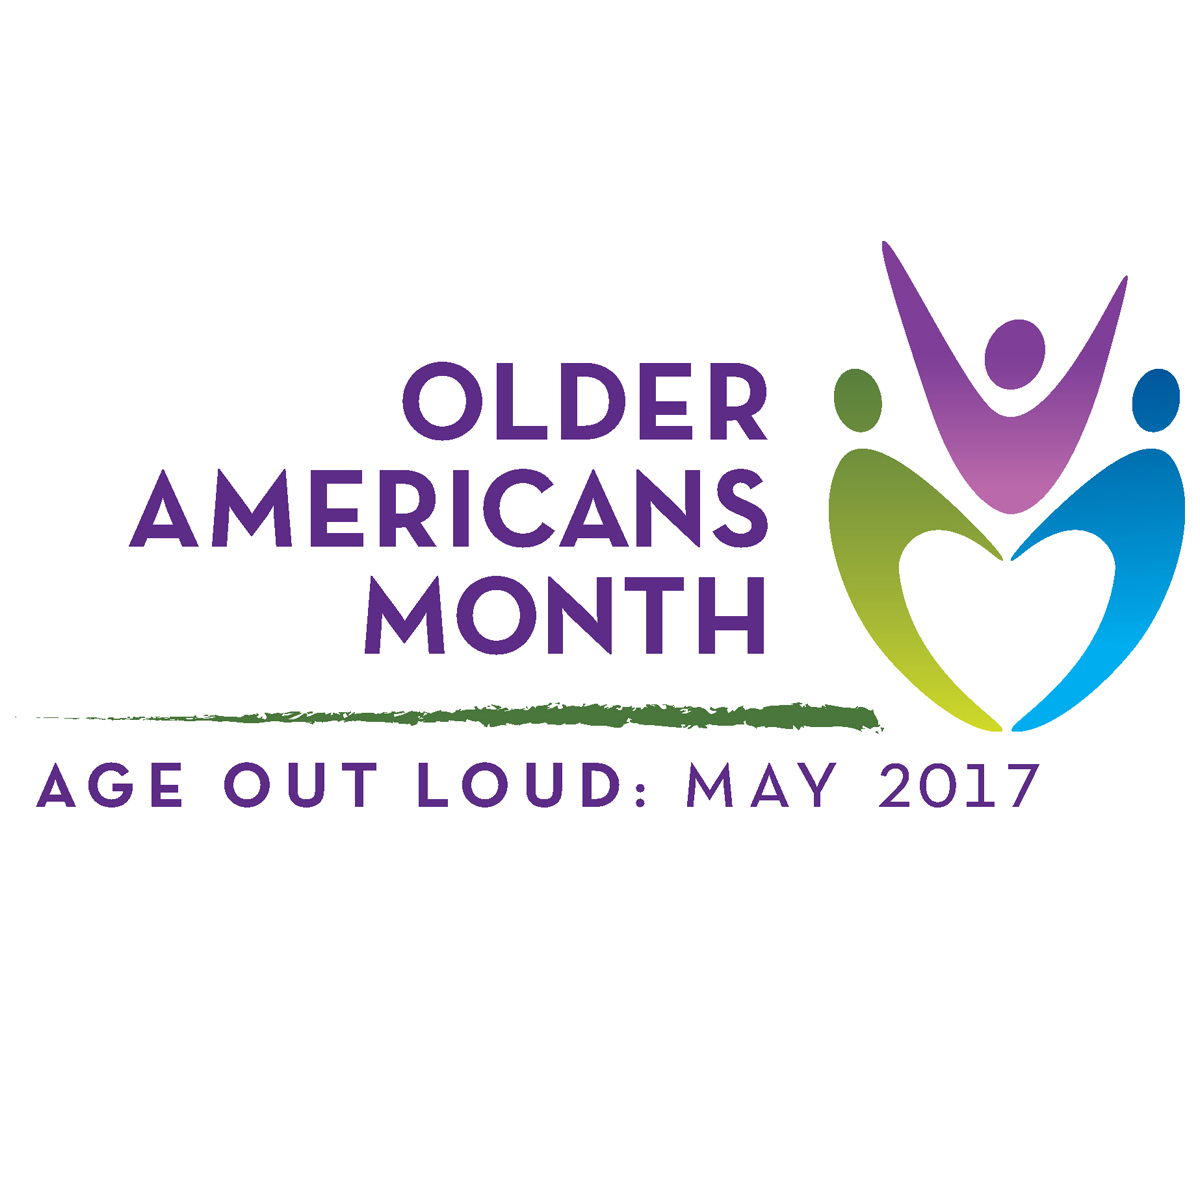 Age Out Loud During Older Americans Month